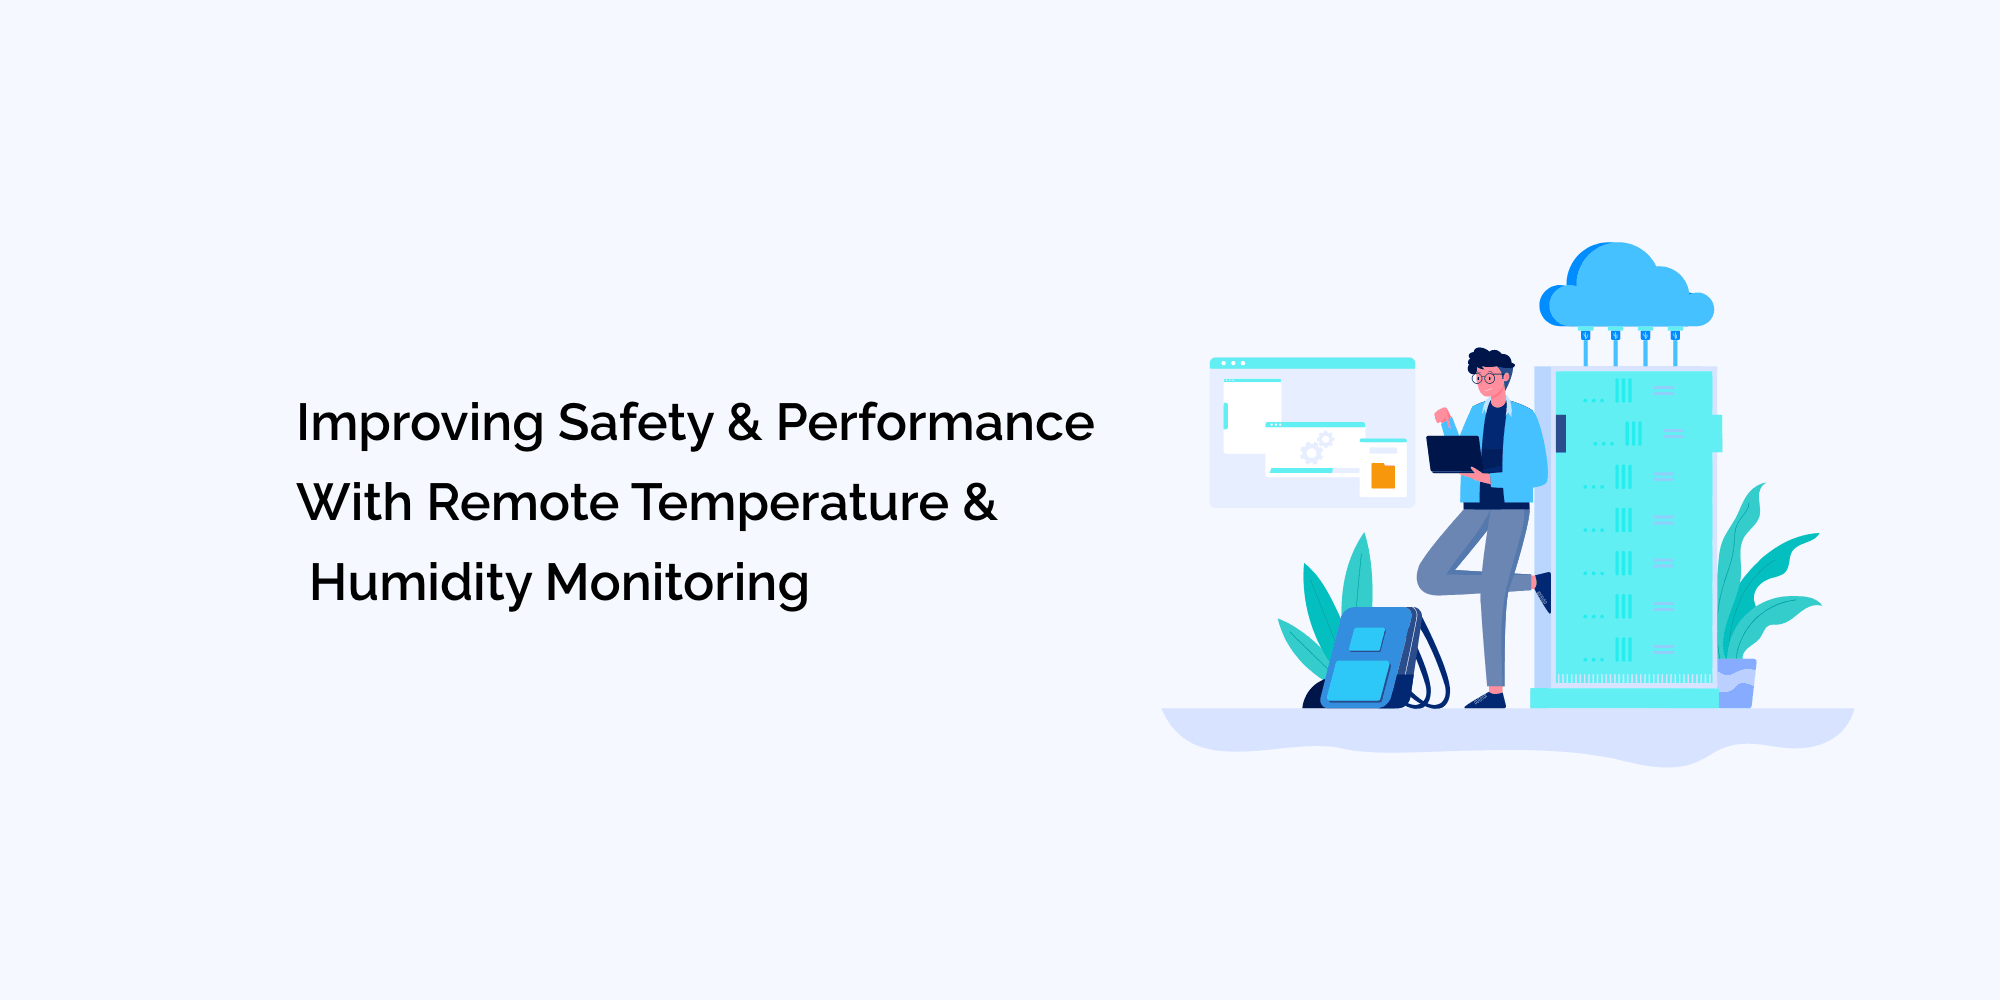 Improving Safety and Performance with Remote Temperature and Humidity Monitoring